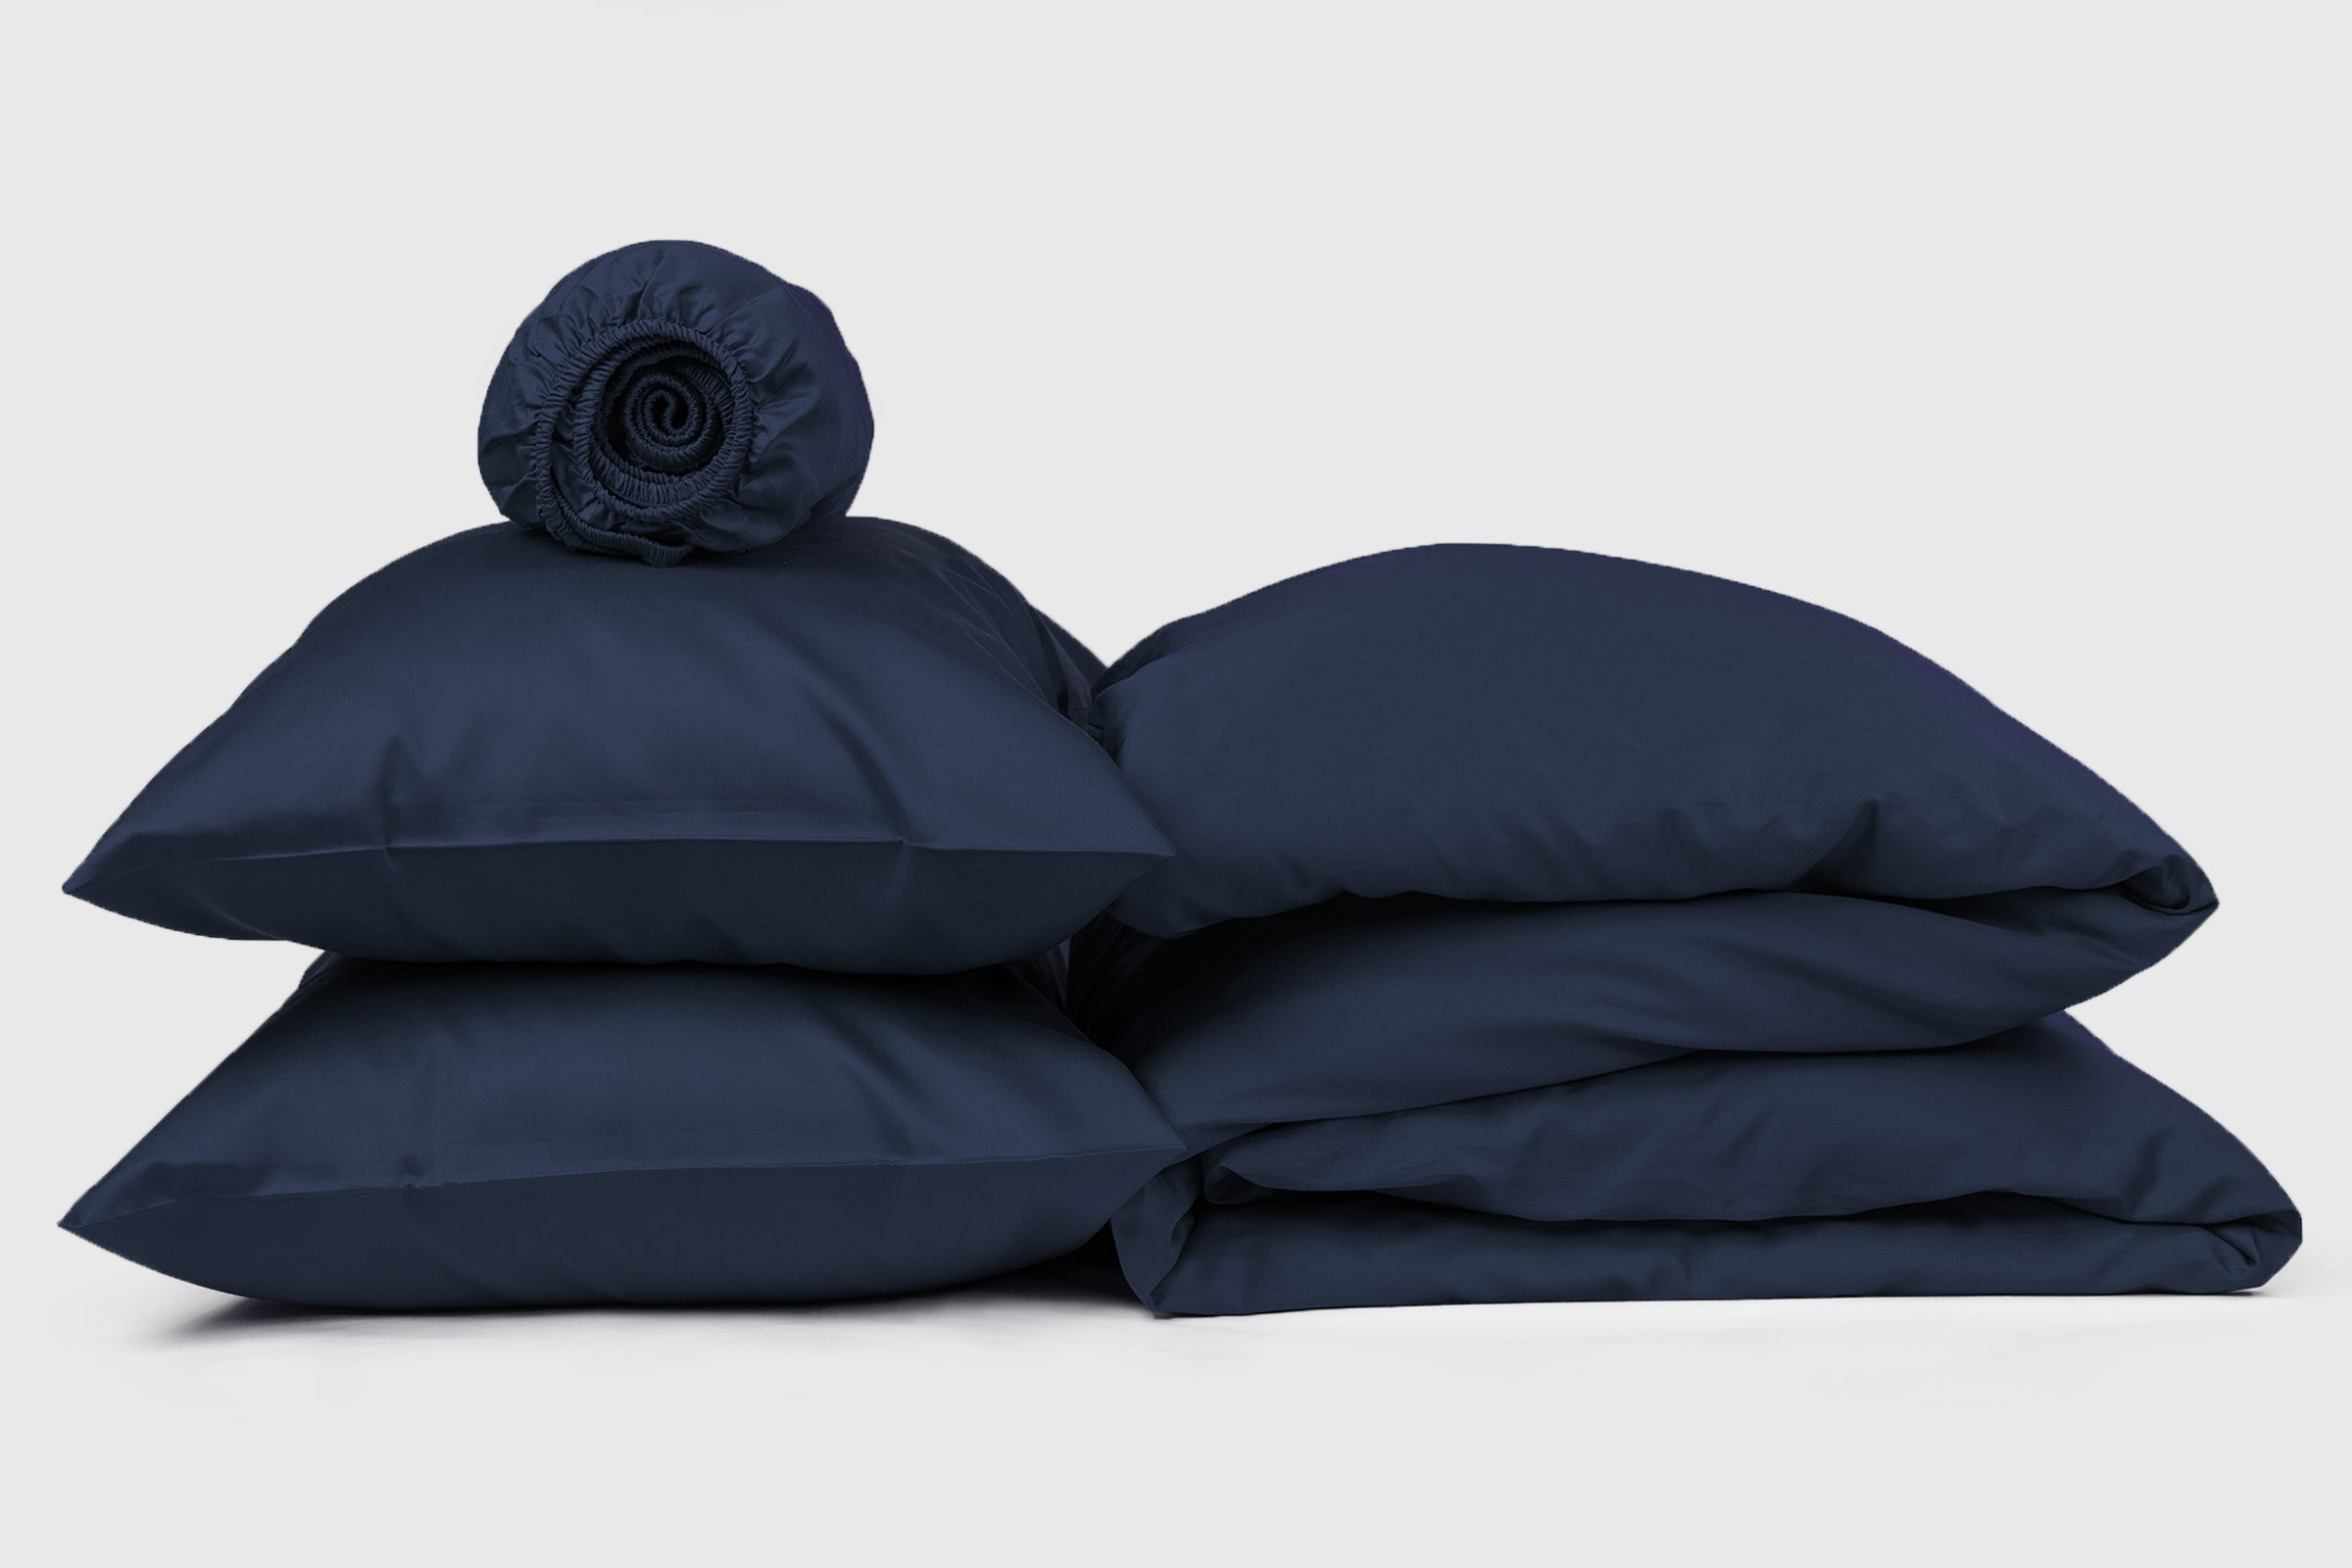 classic-navy-bundle-set-fitted-sheet-duvet-cover-pillowcase-pair-by-sojao.jpg